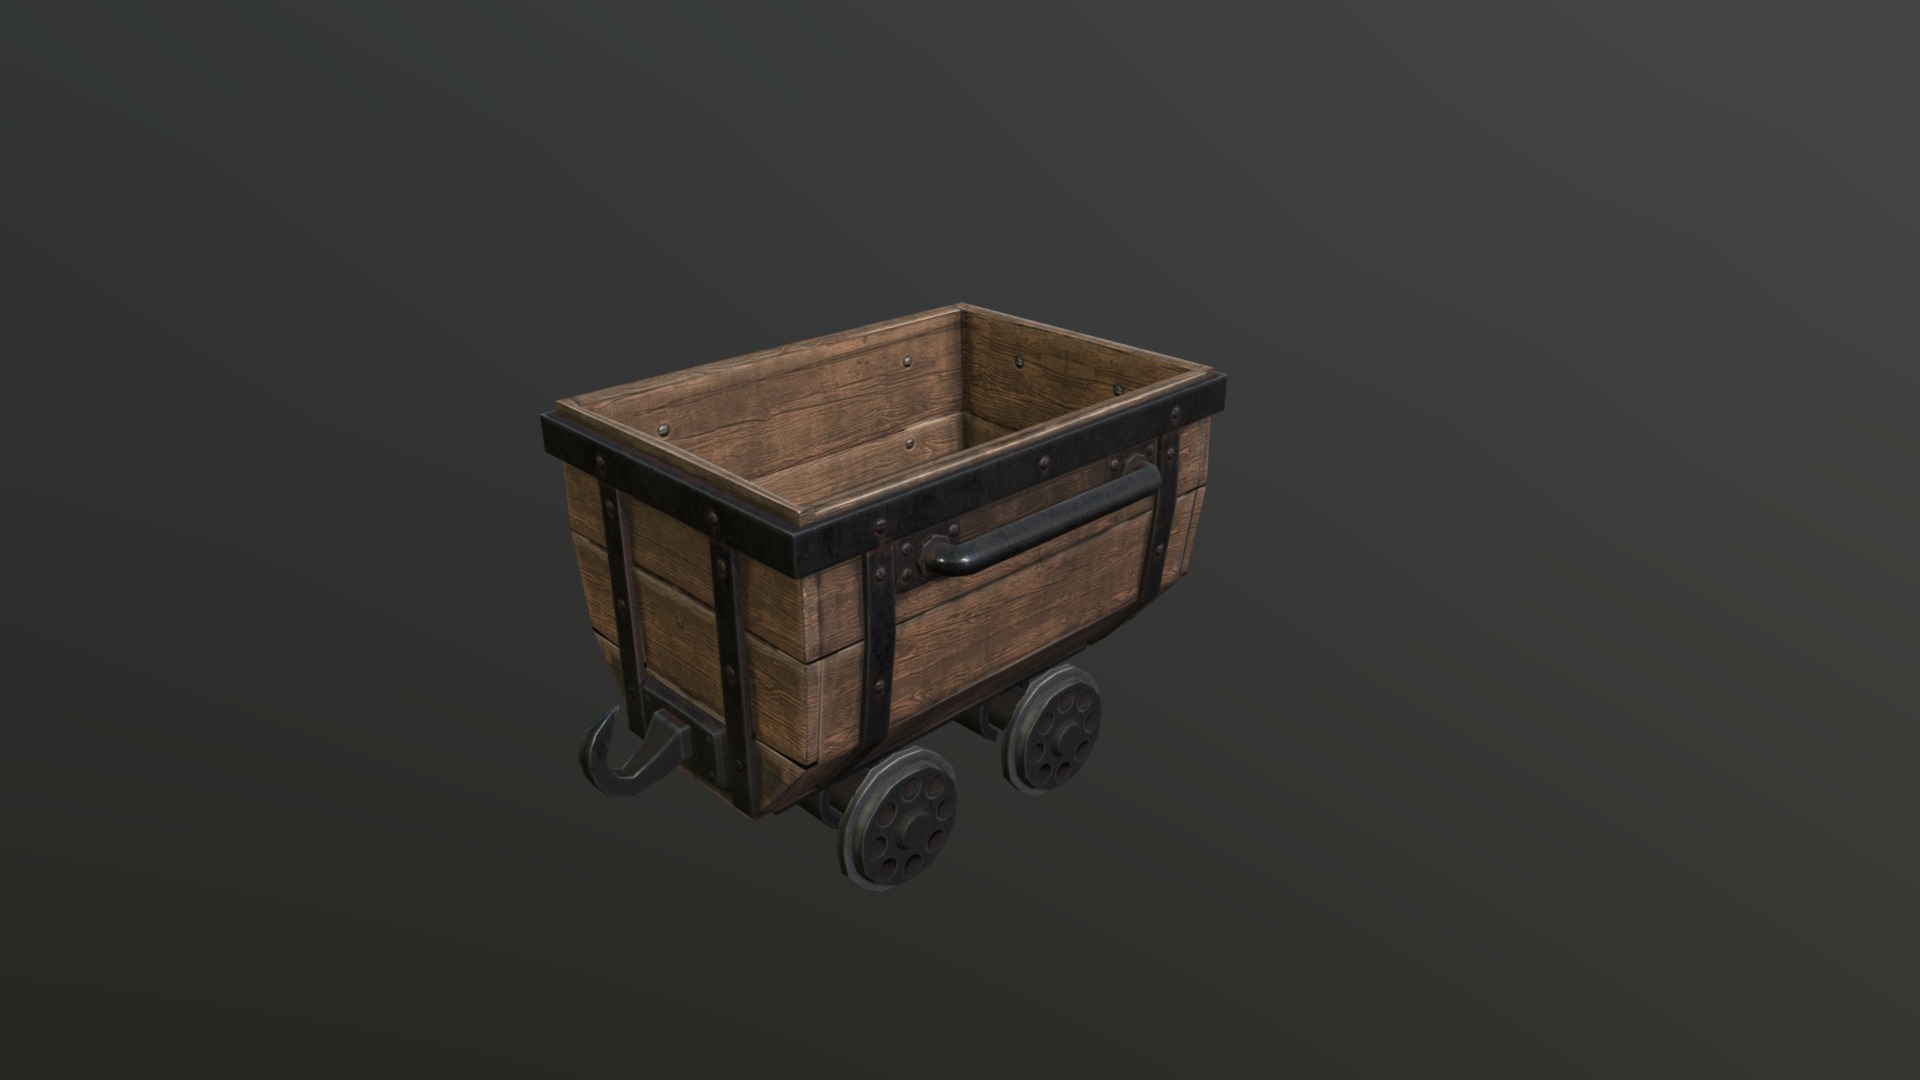 3D model Vagon - This is a 3D model of the Vagon. The 3D model is about a wooden box with wheels.